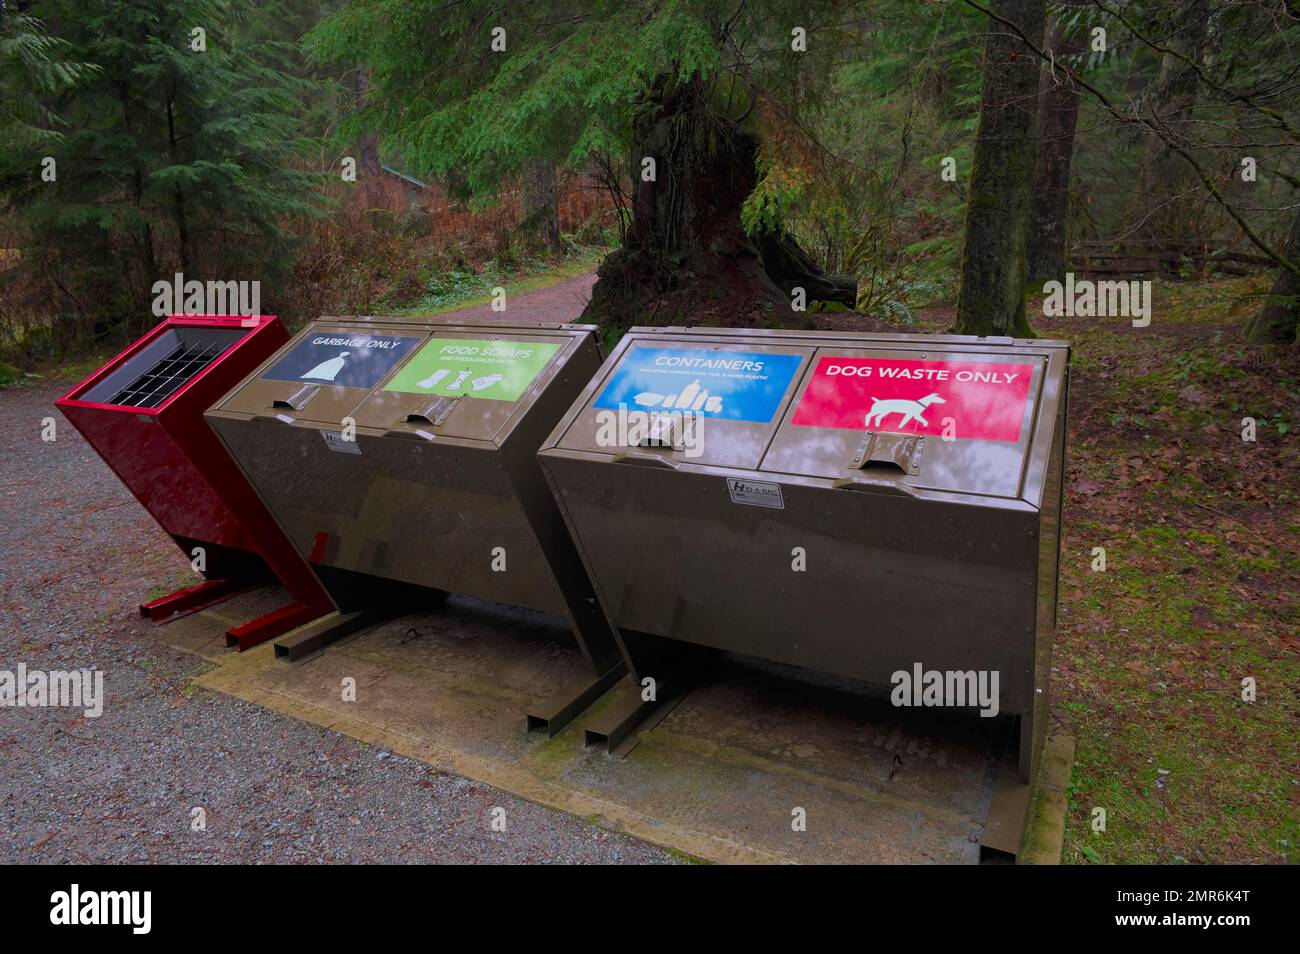 Metal, bear-proof refuse containers at a trailhead in Kanaka Creek Regional Park - Pacific Northwest - Maple Ridge, B. C., Canada. Stock Photo